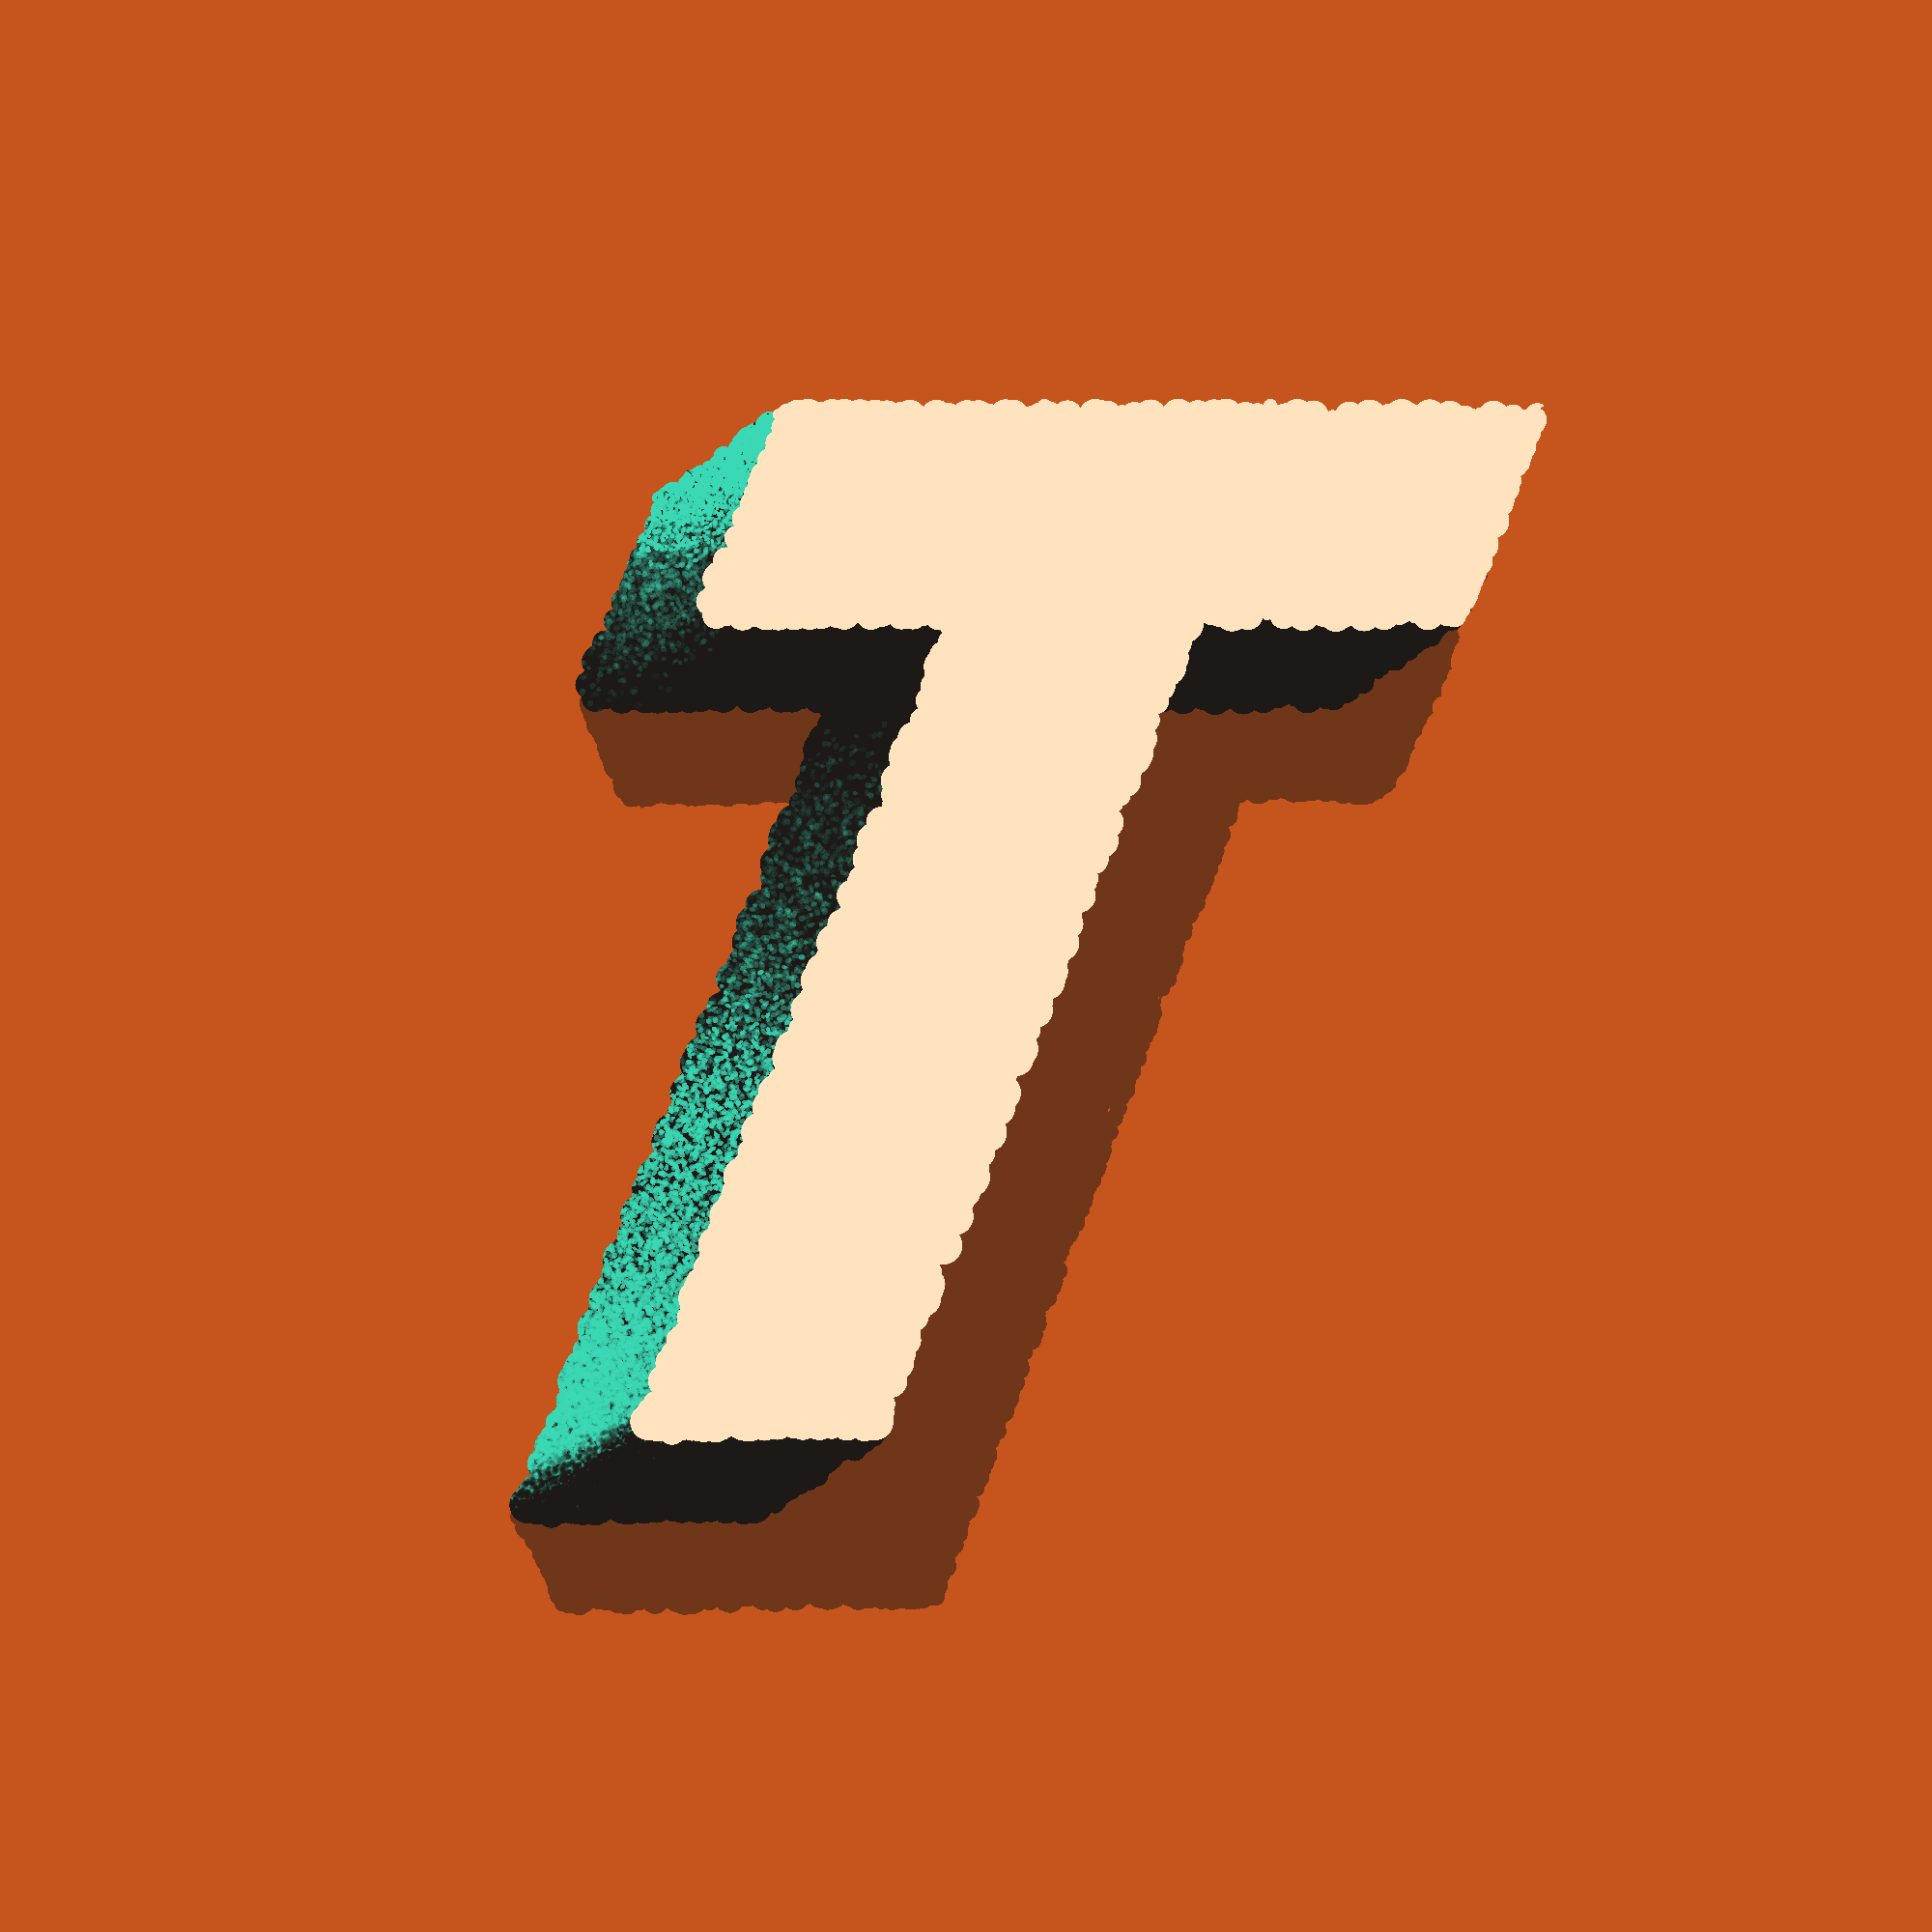 36-Days-of-Type-Day-20-T.png